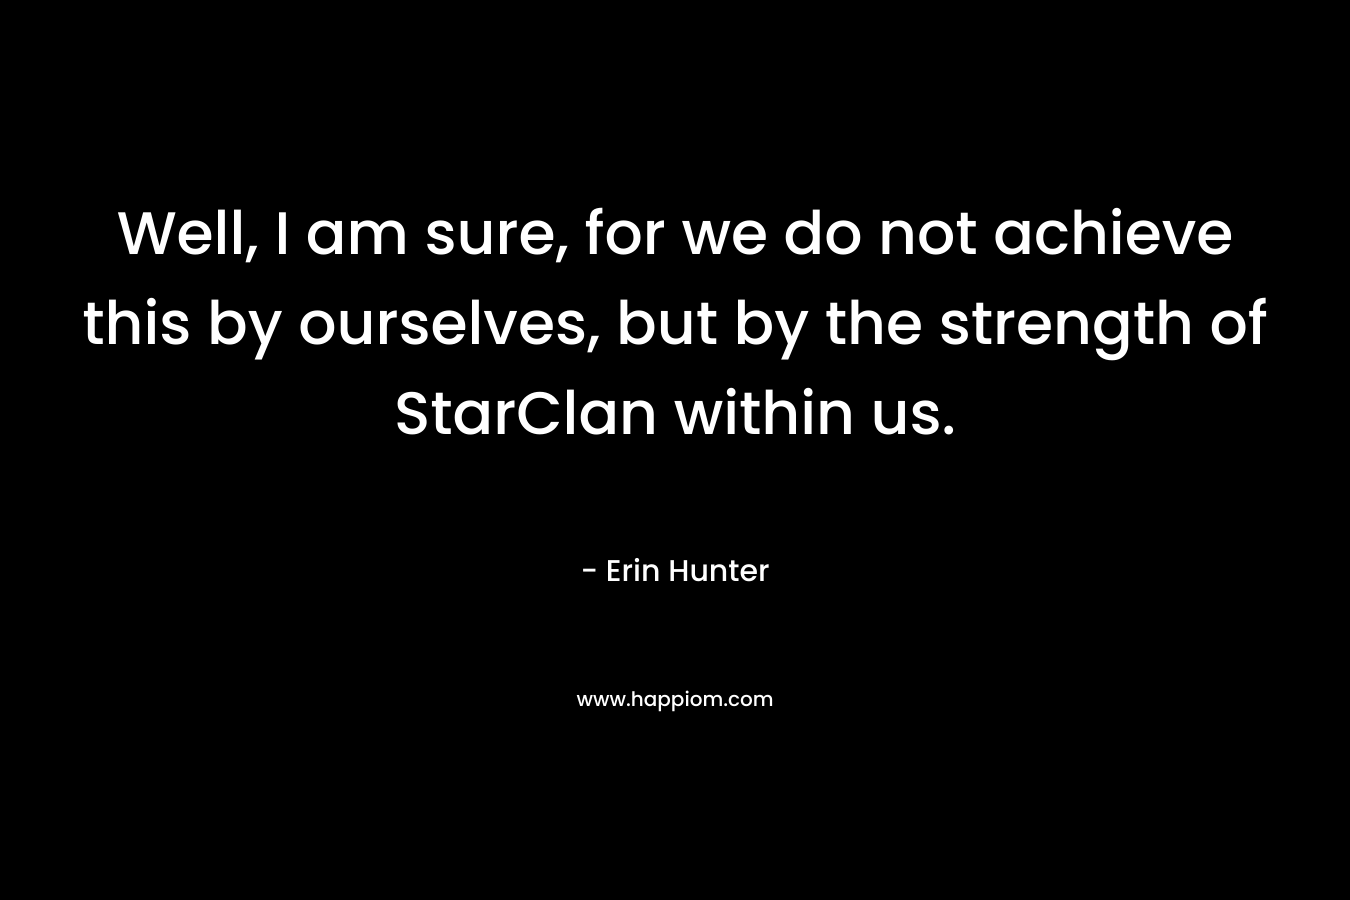 Well, I am sure, for we do not achieve this by ourselves, but by the strength of StarClan within us.